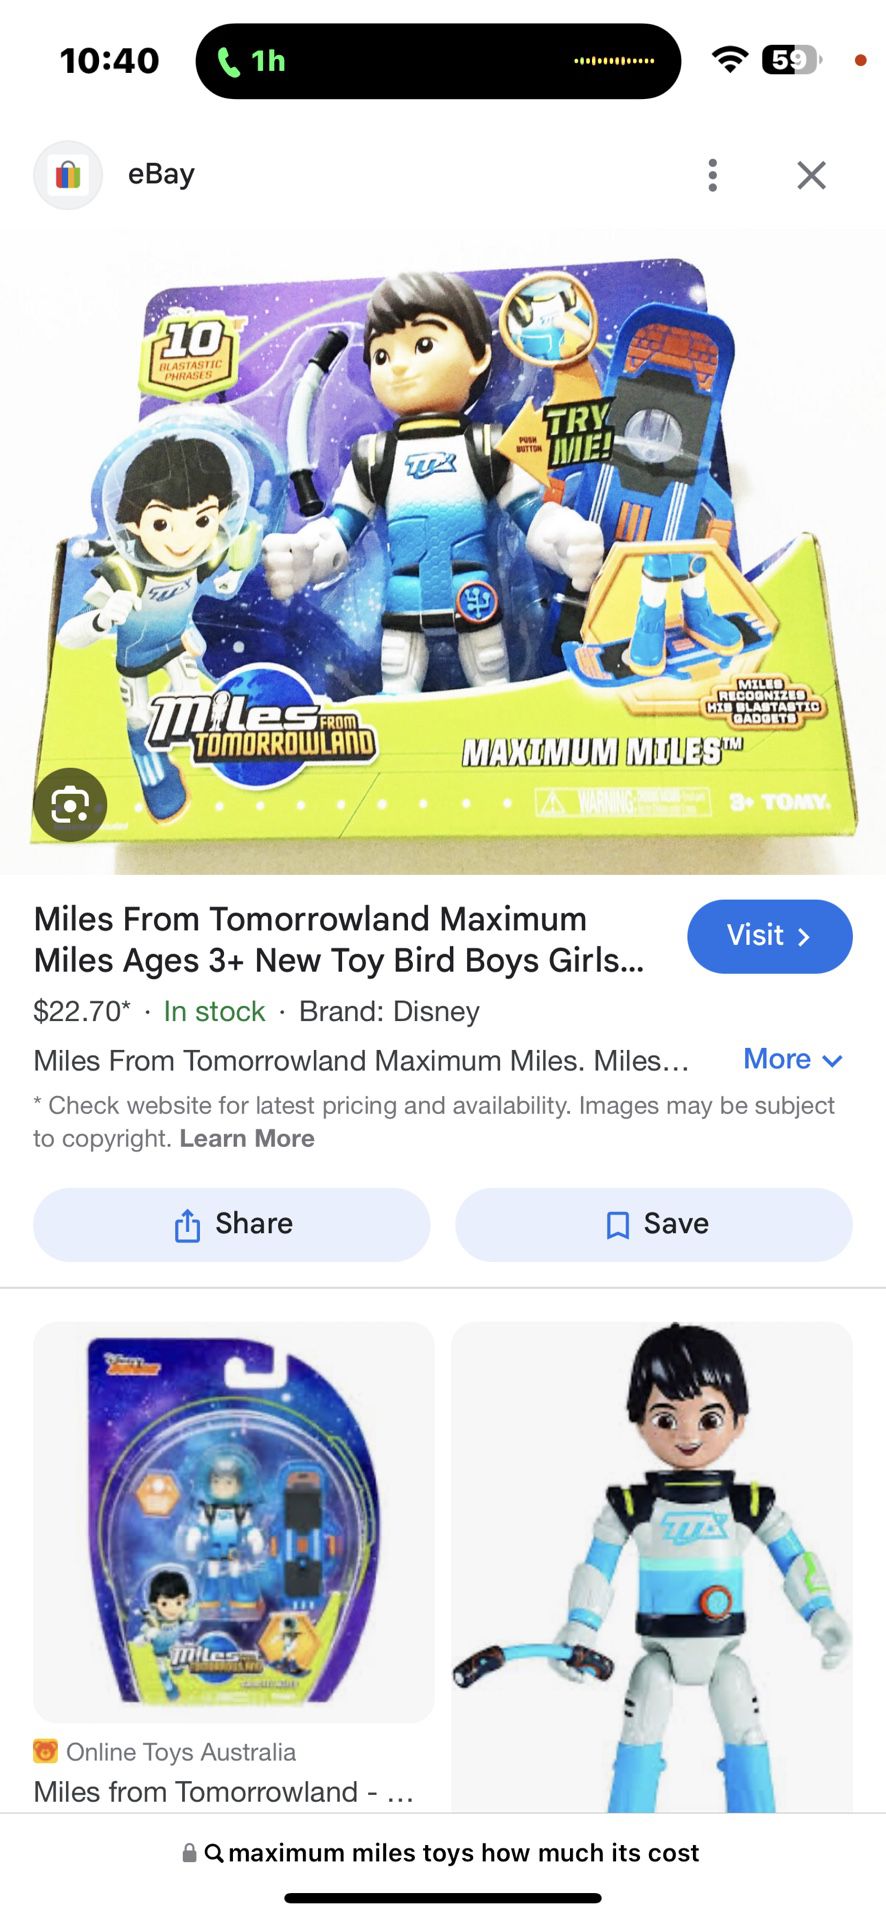 Miles From Tomorrowland Maximum Visit > Miles Ages 3+ New Toy Bird Boys Girls...